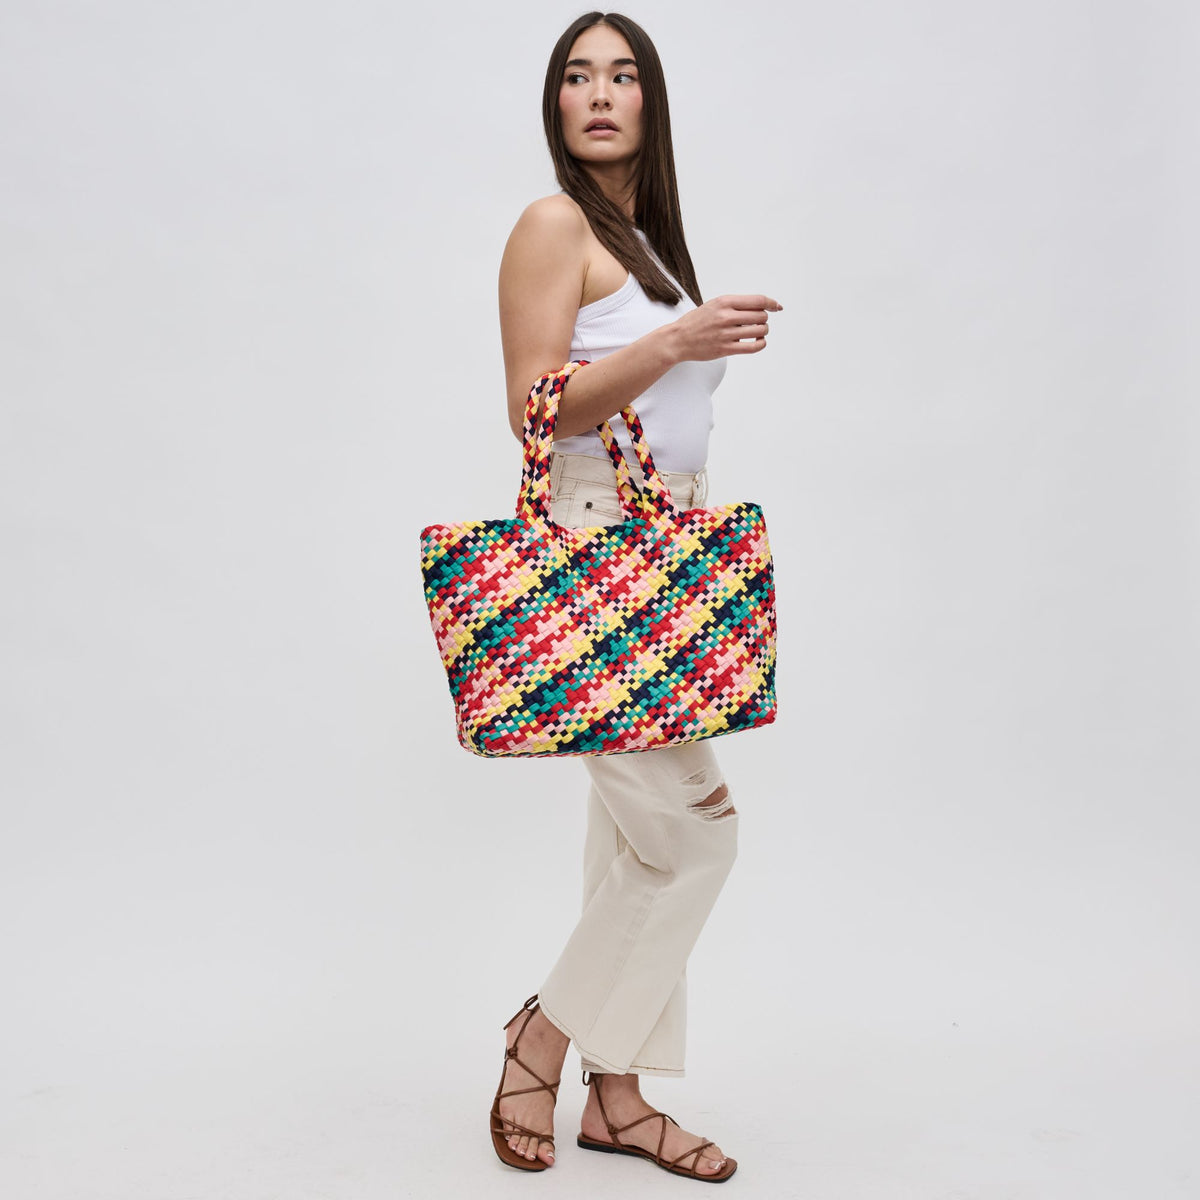 Woman wearing Candy Sol and Selene Sky's The Limit - Large Tote 841764109321 View 4 | Candy